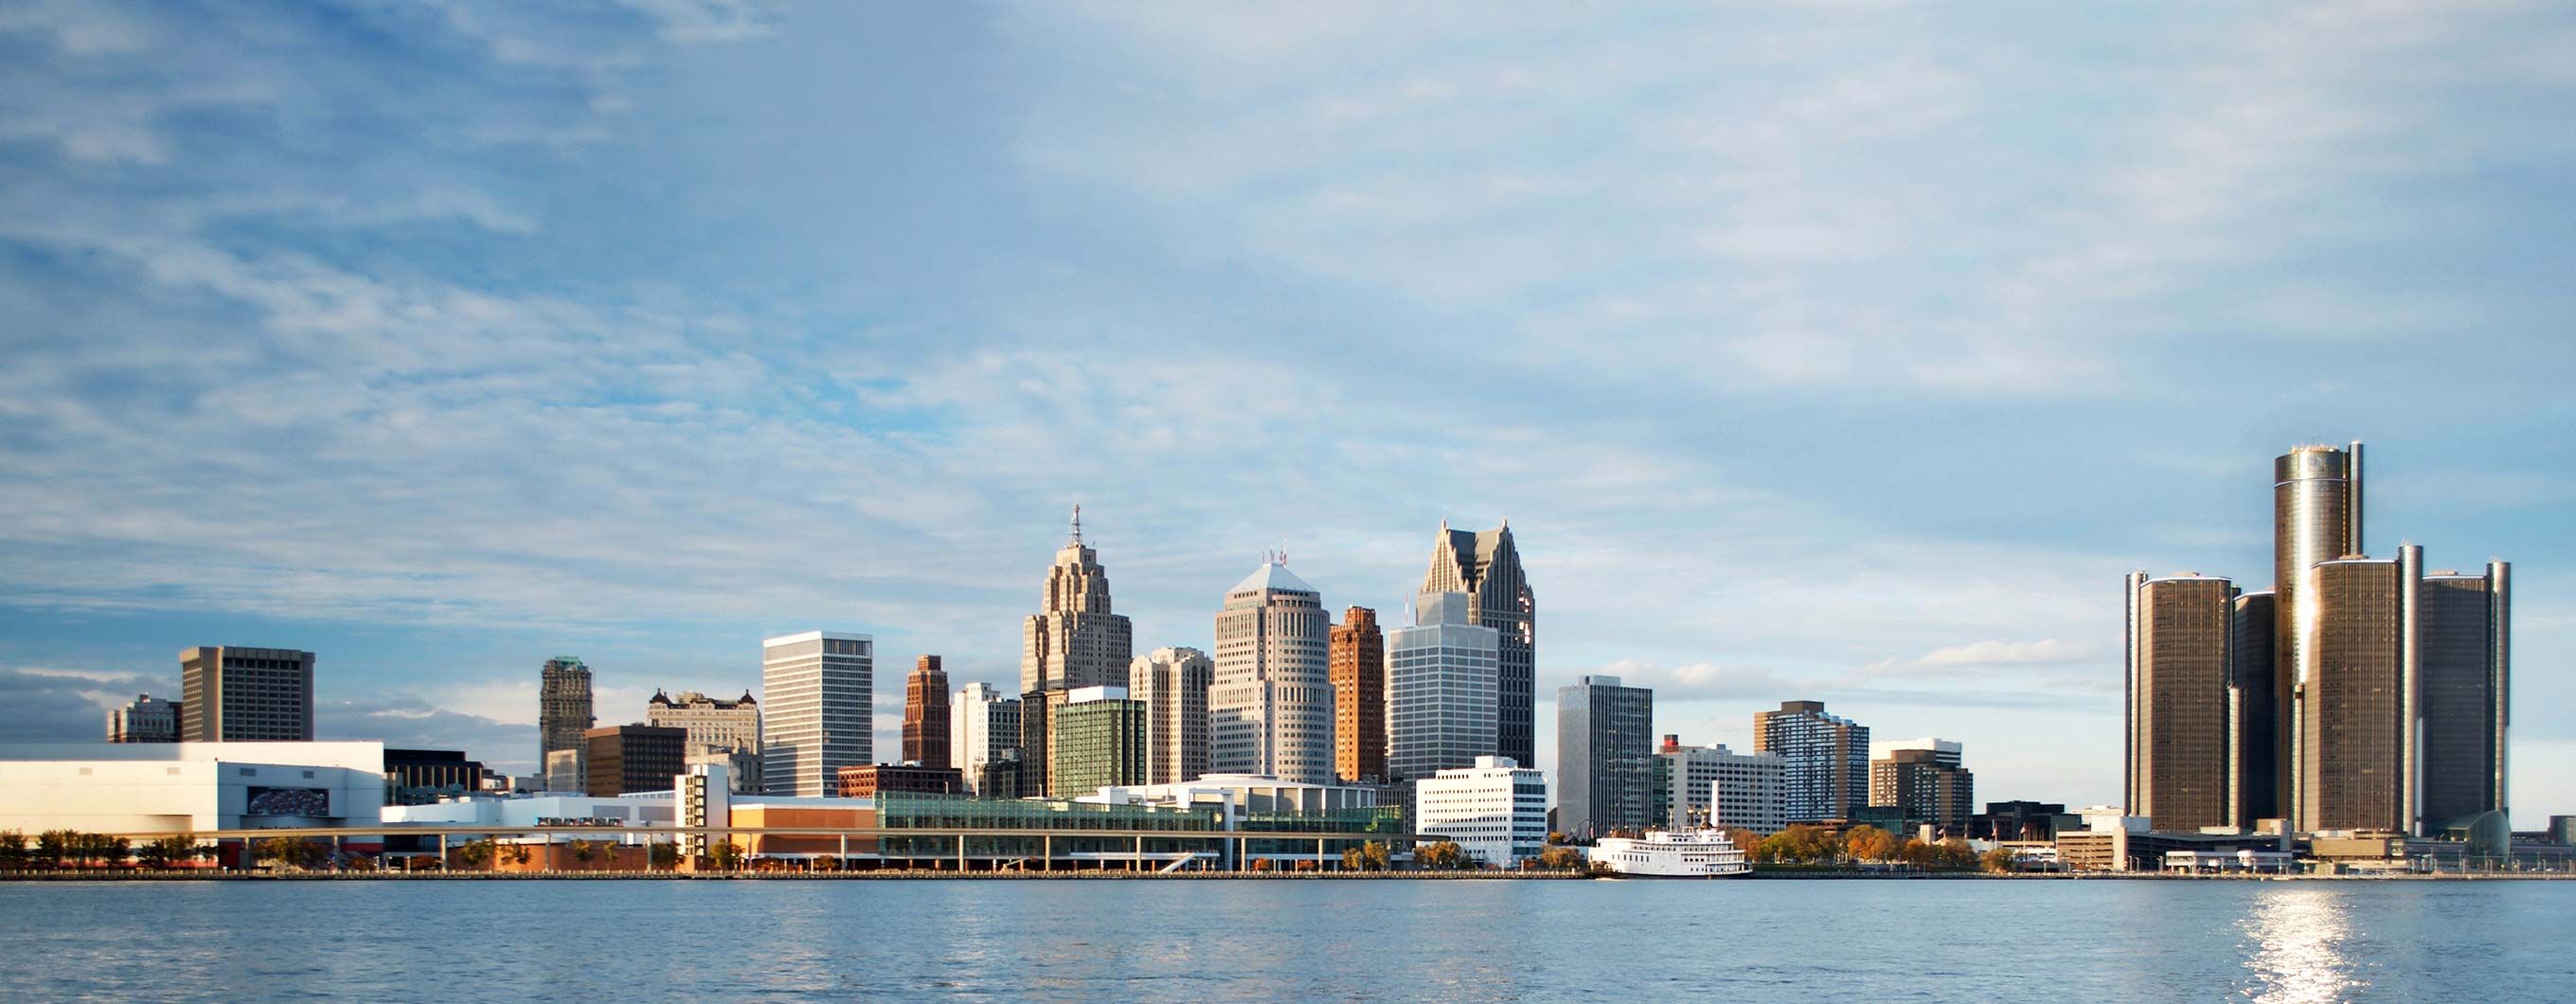 Image of the Detroit city skyline with a body of water in front and a blue sky with clouds behind